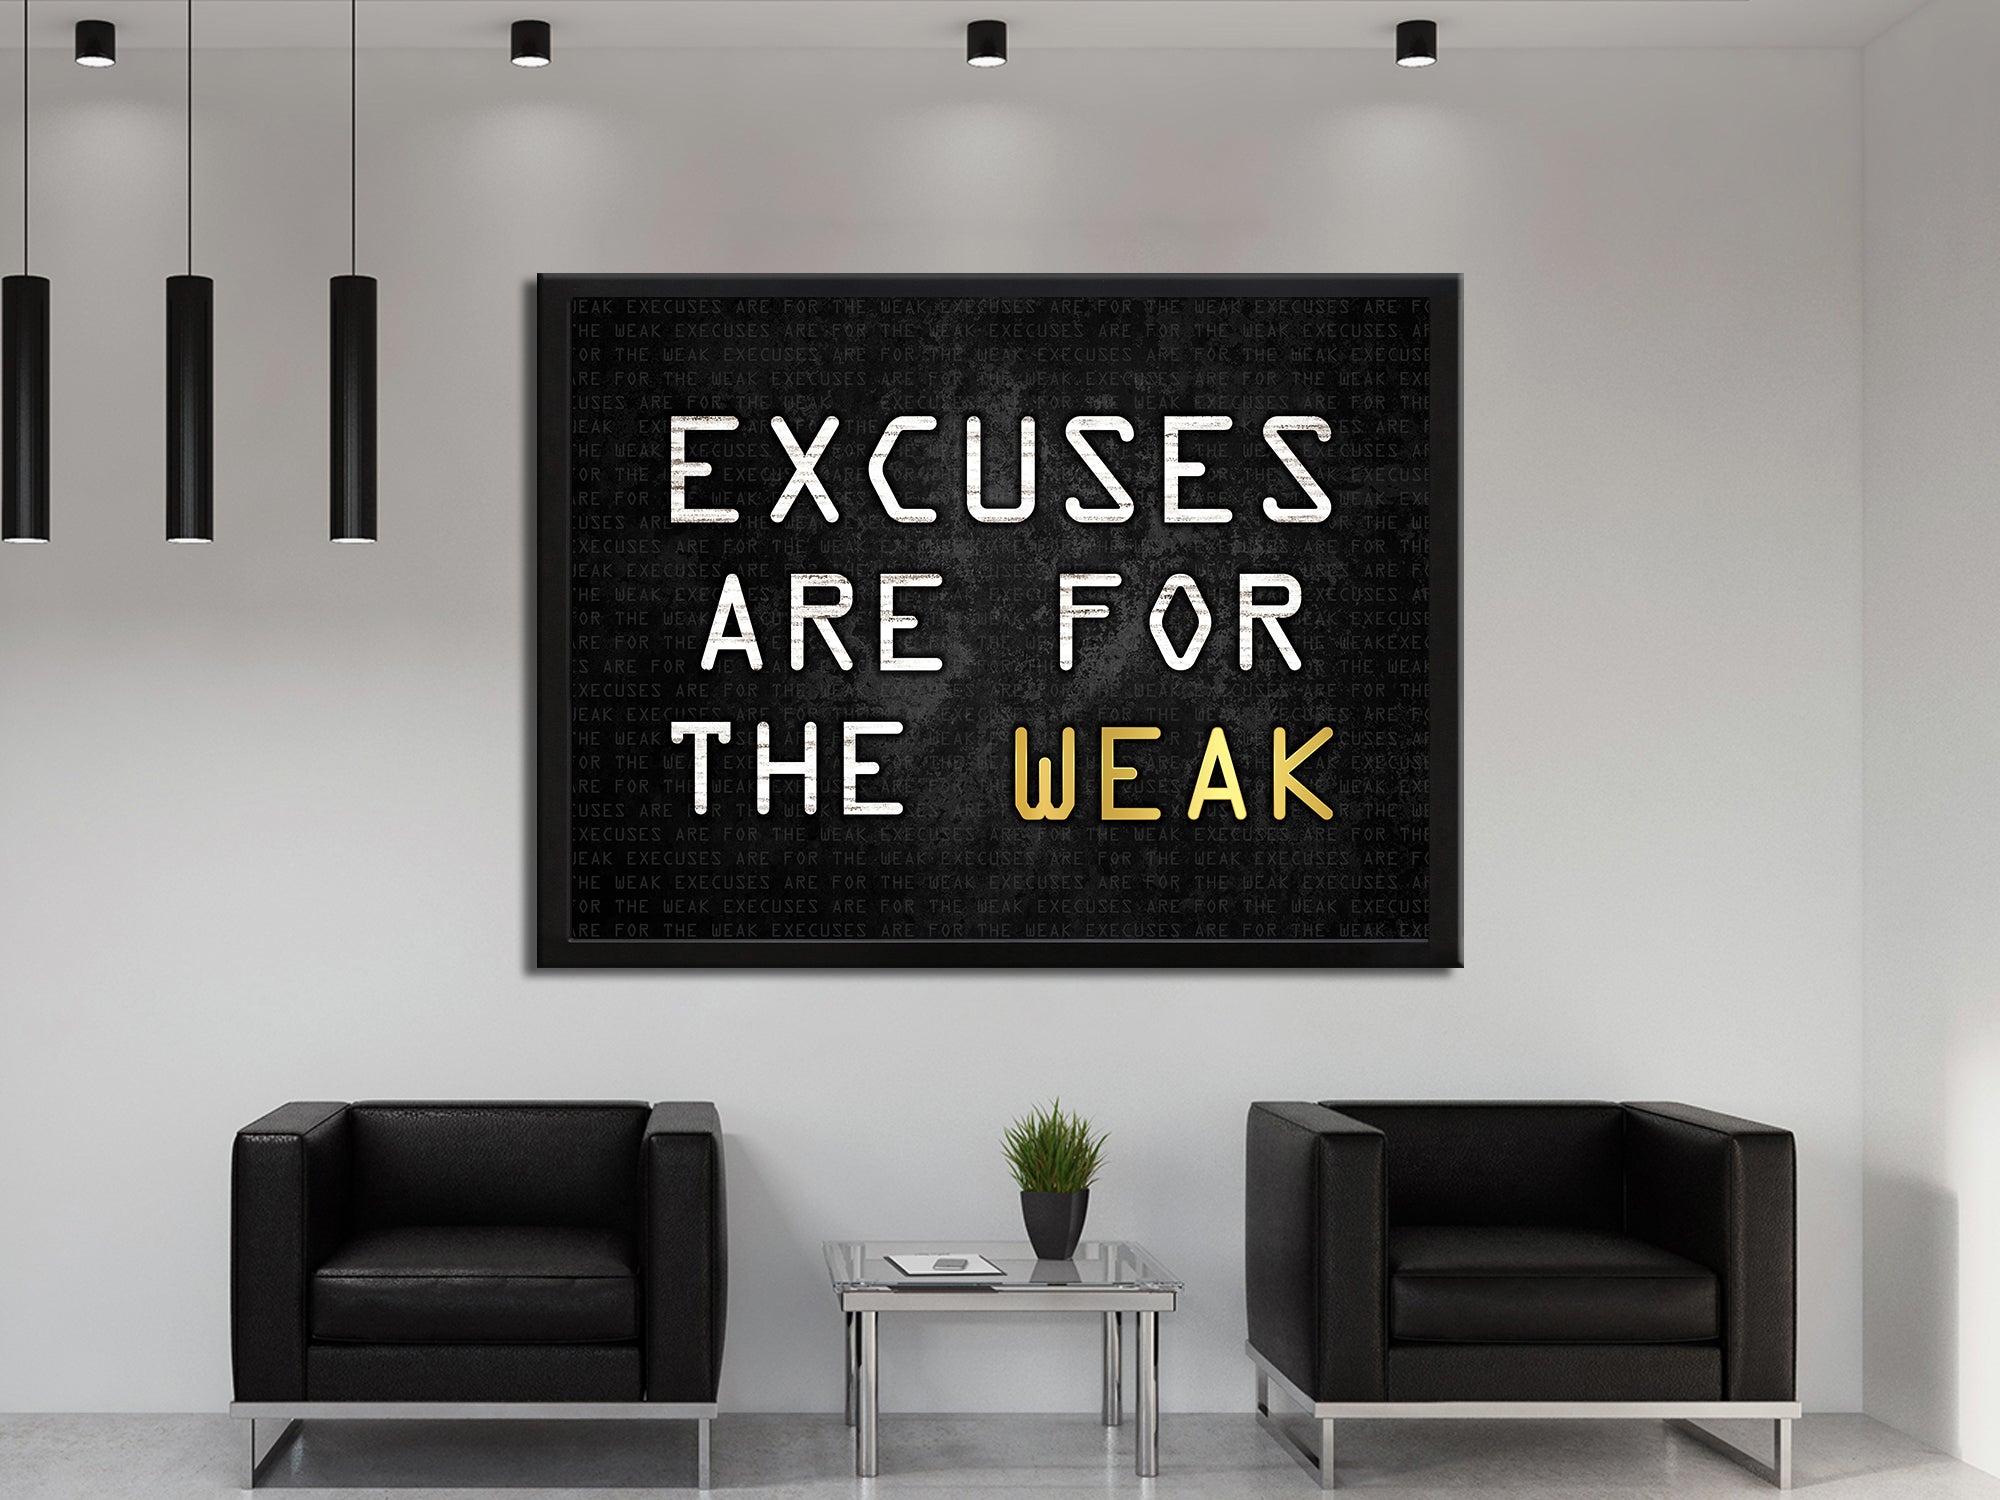 Excuses Are For The Week - Living Room - Canvas Wall Art